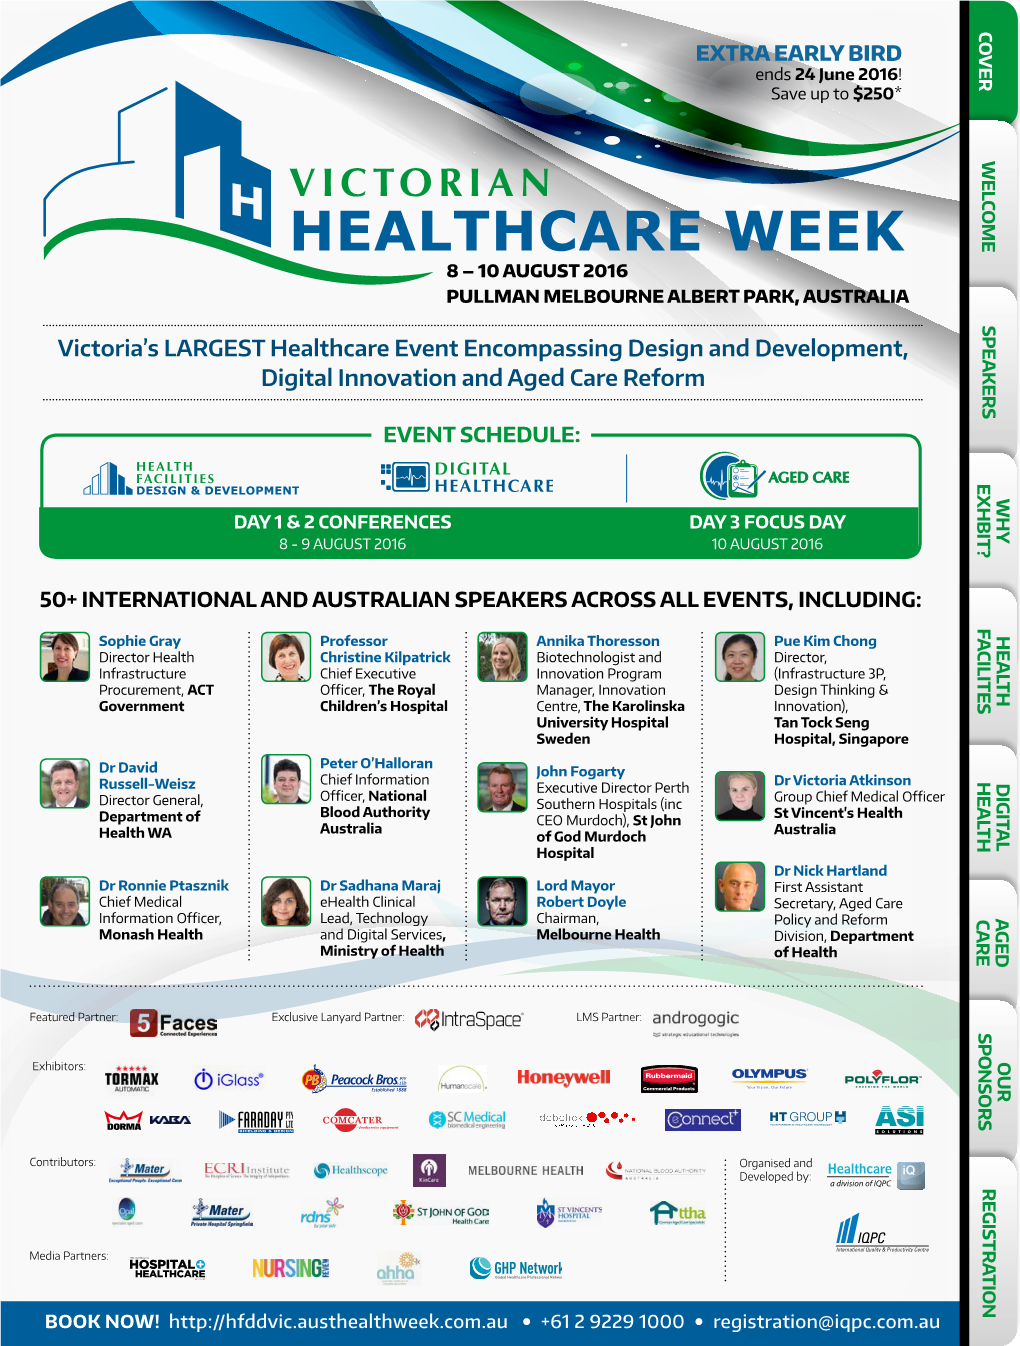 Victoria's LARGEST Healthcare Event Encompassing Design And